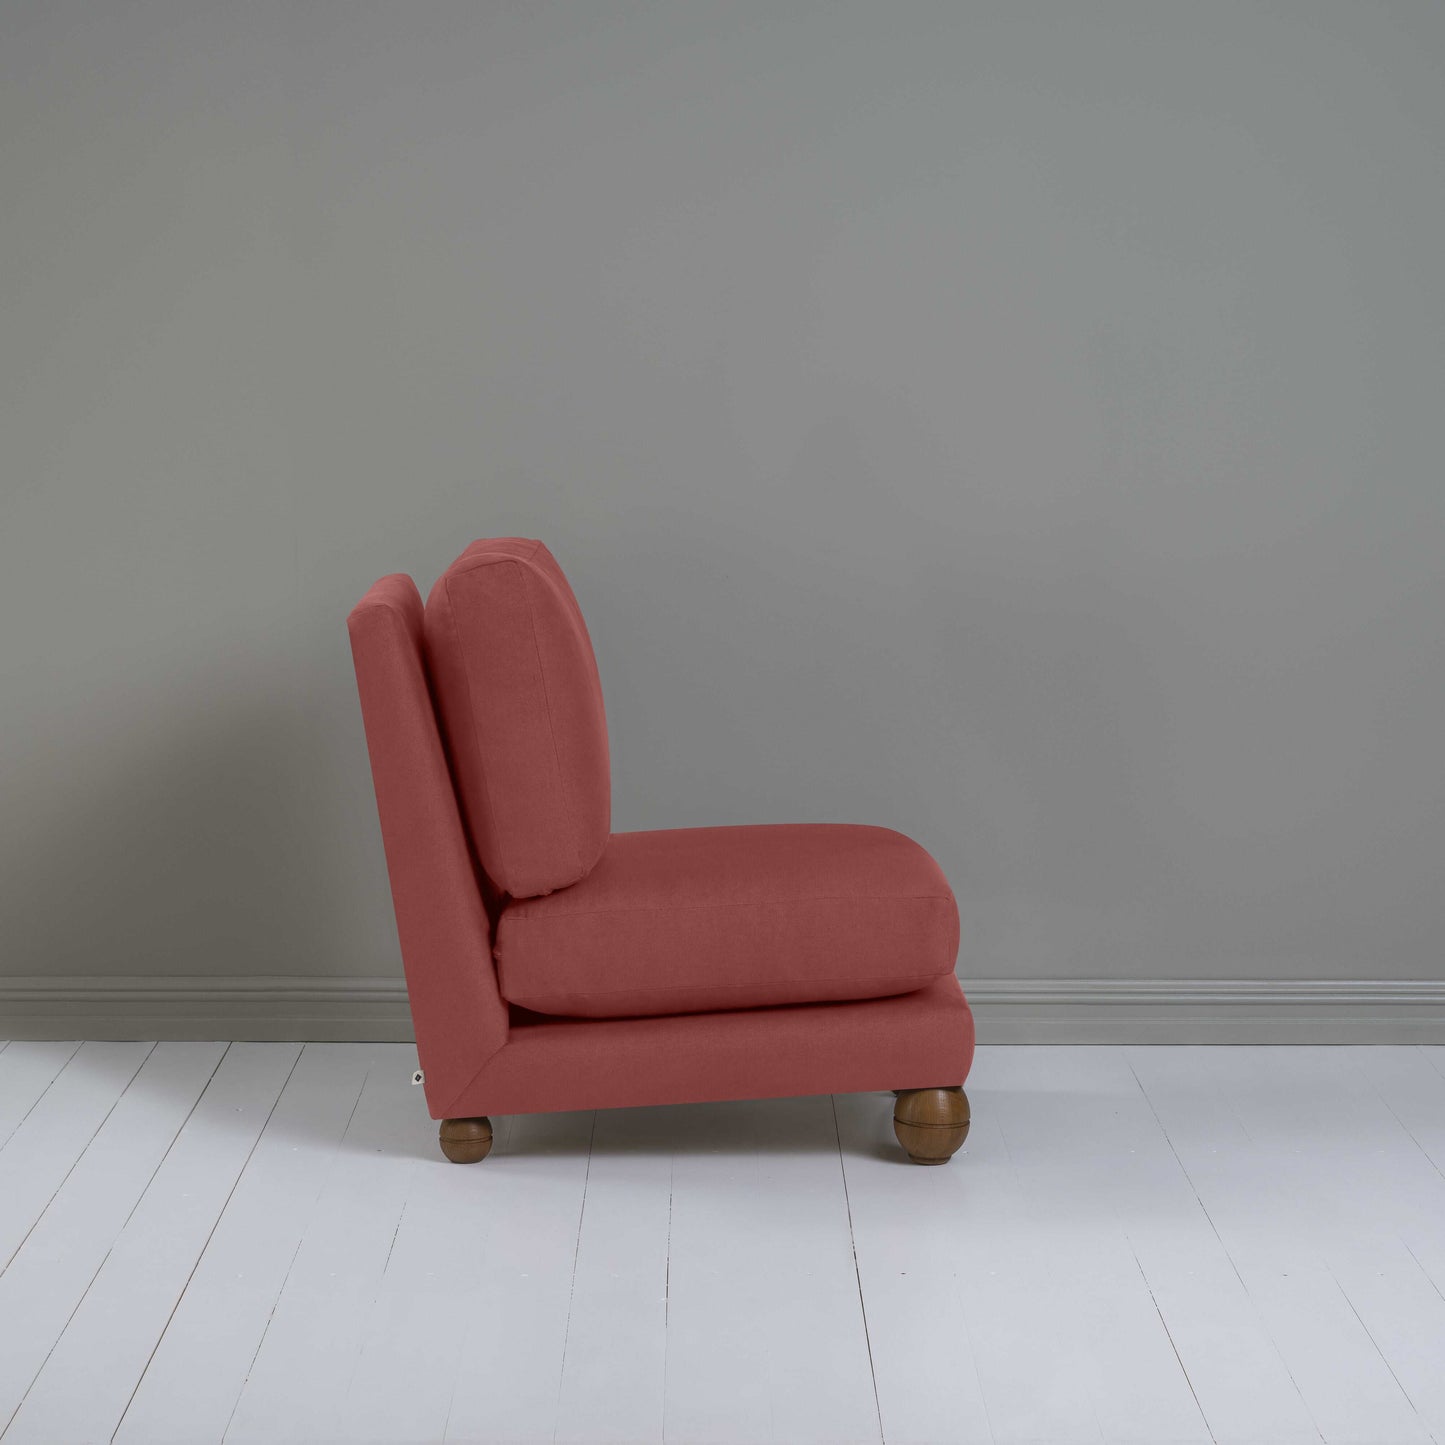 Perch Slipper Armchair in Laidback Linen Rouge